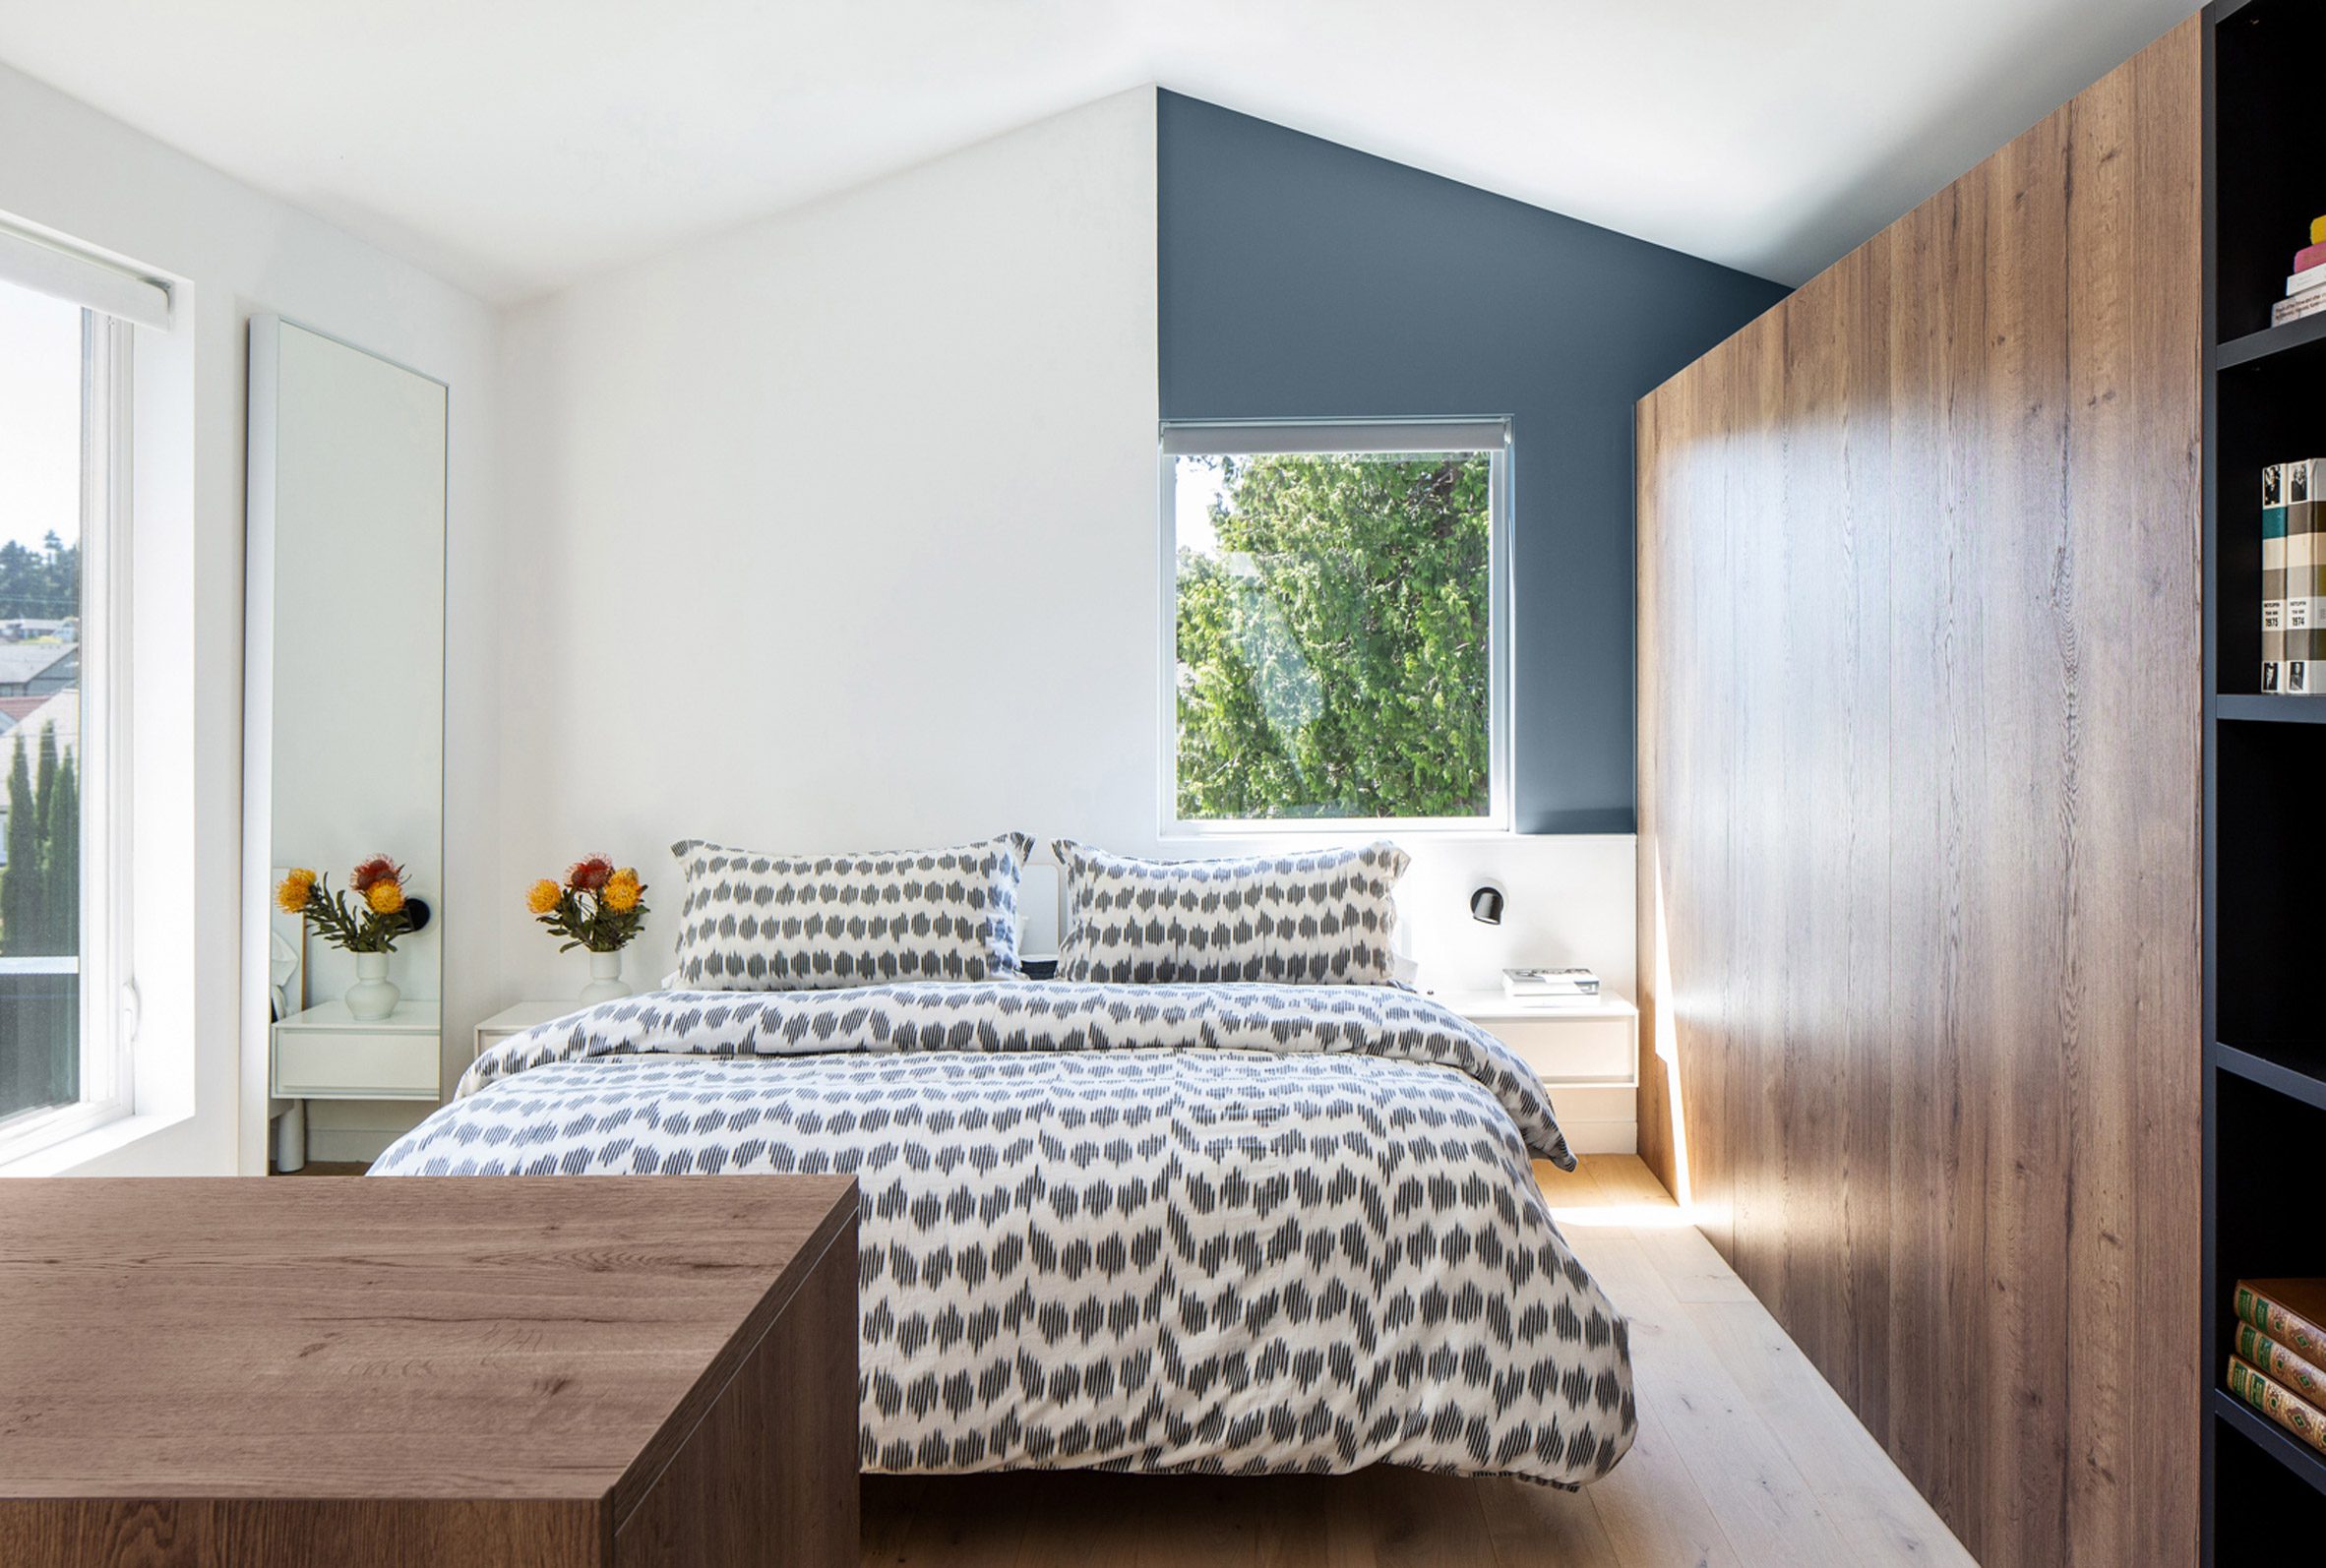 A bedroom suite designed by Best Practice Architecture in the extension